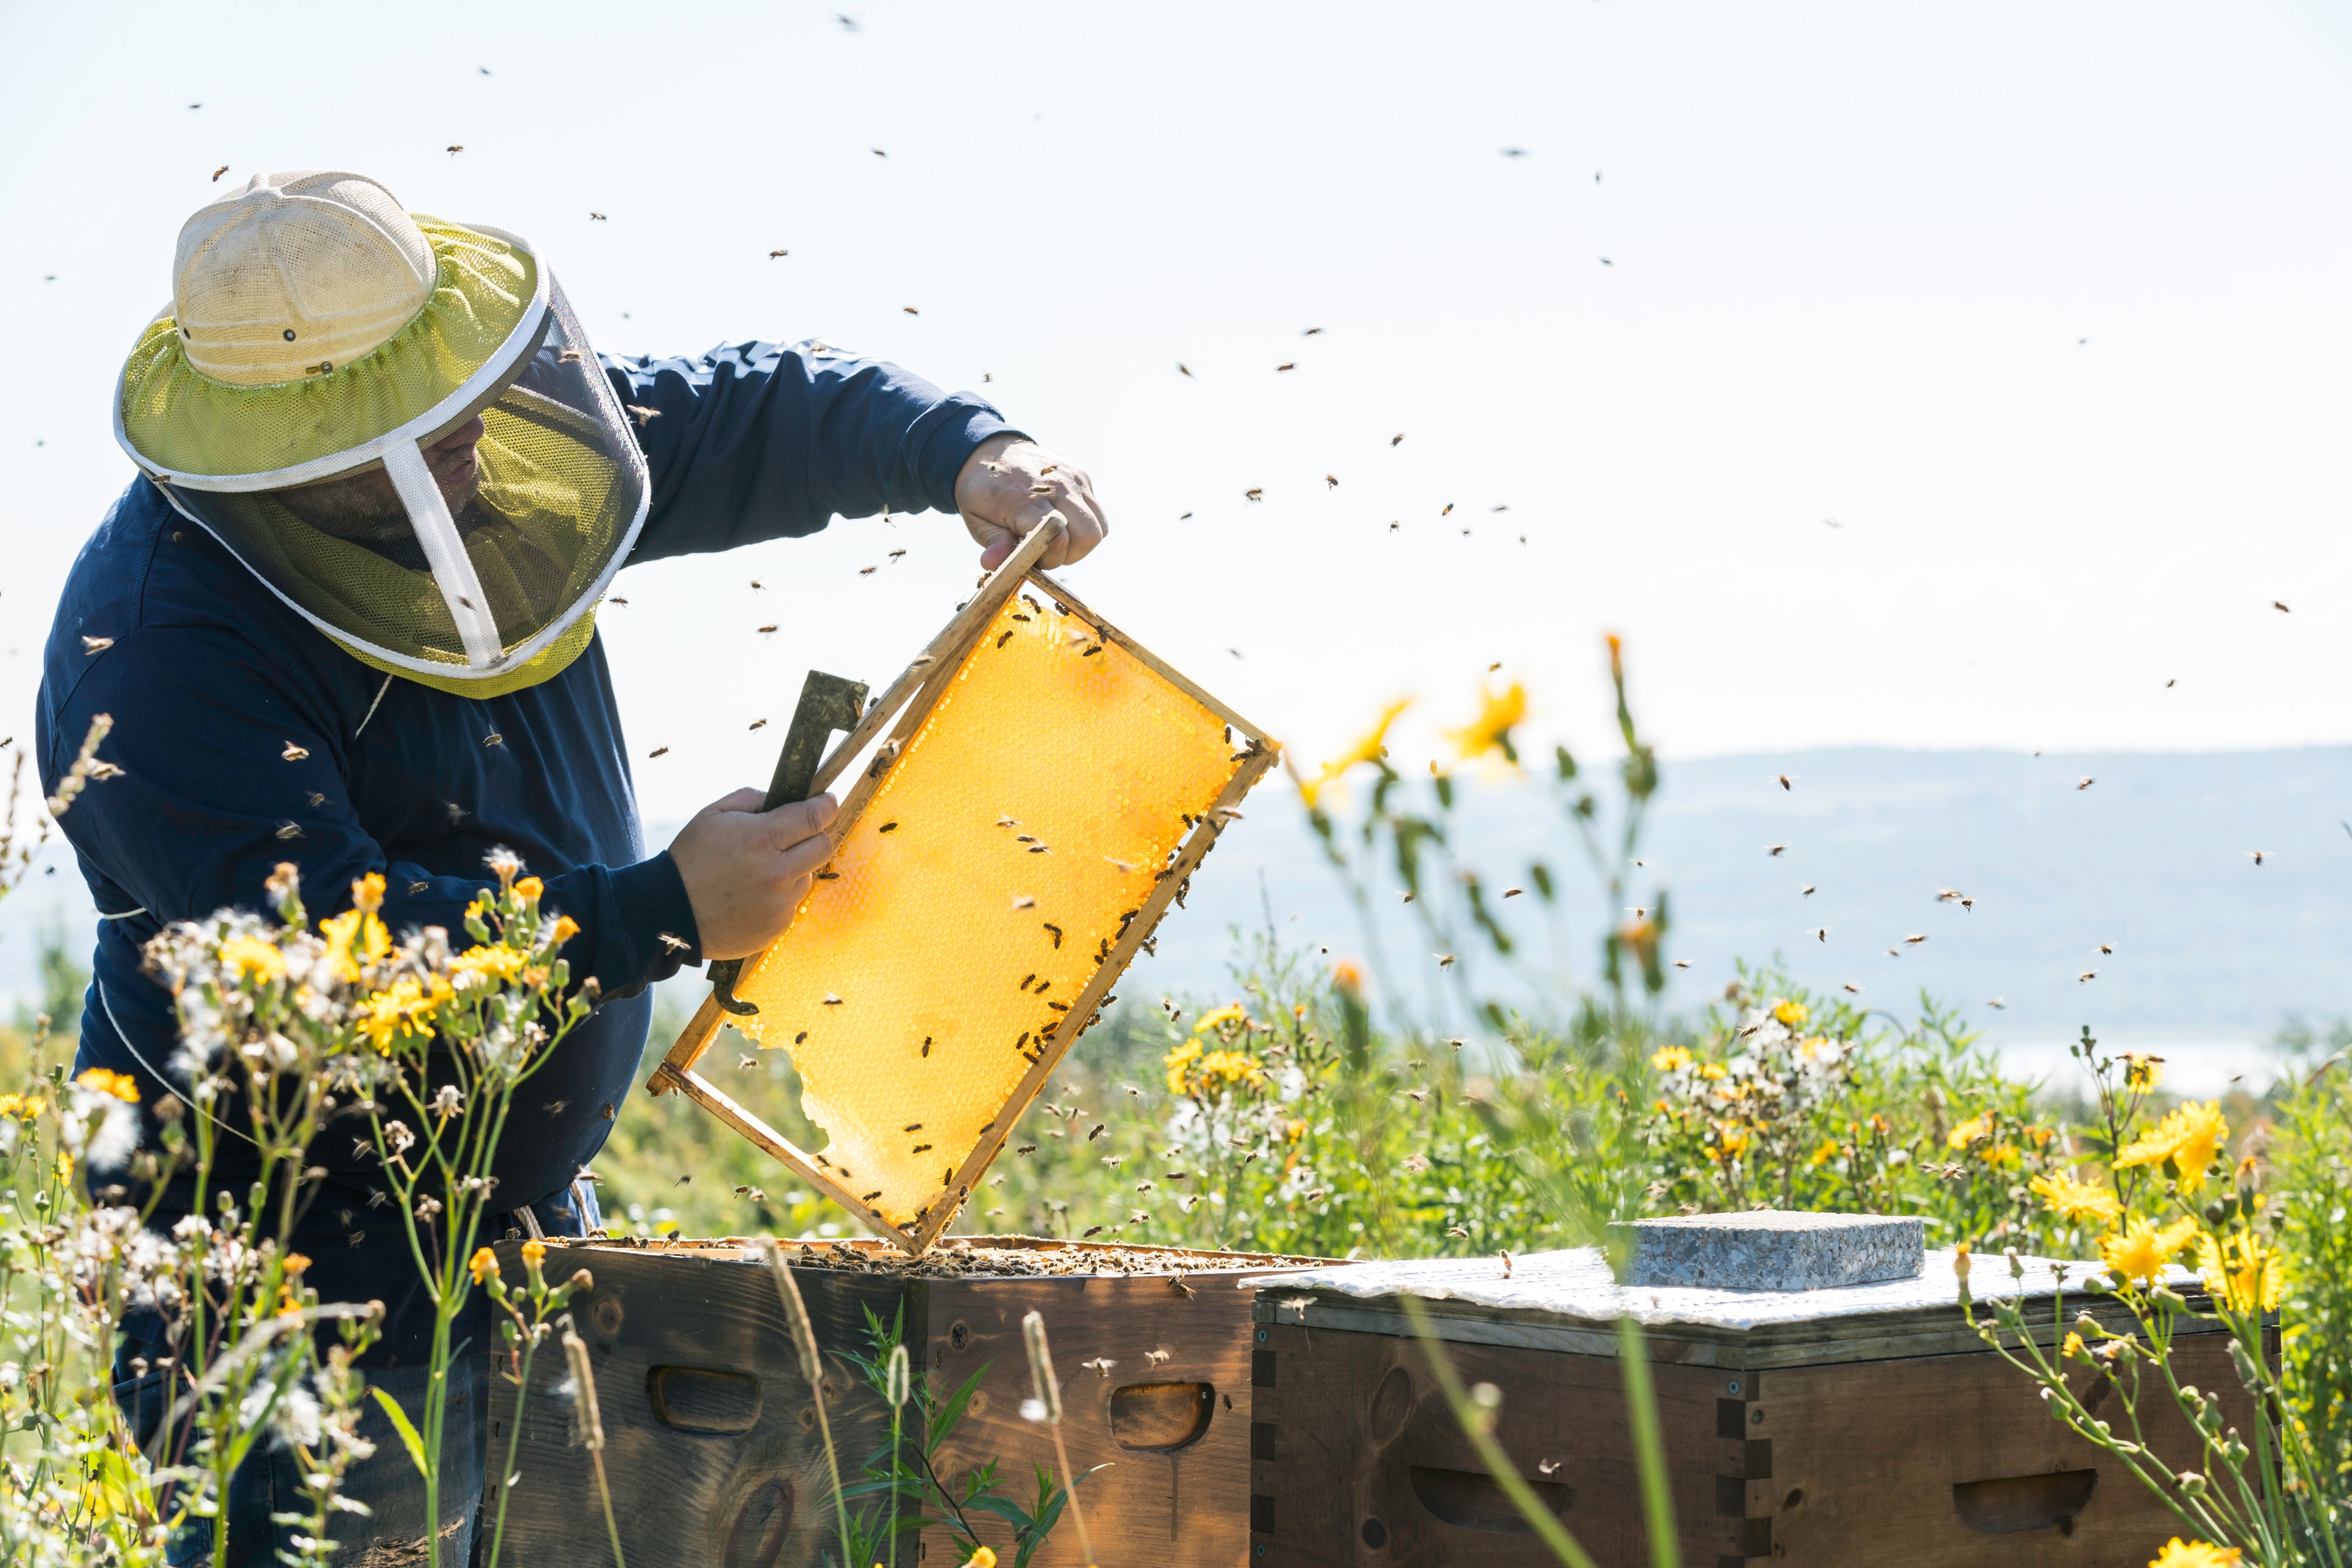 Beekeeping can change how you relate to your own environment